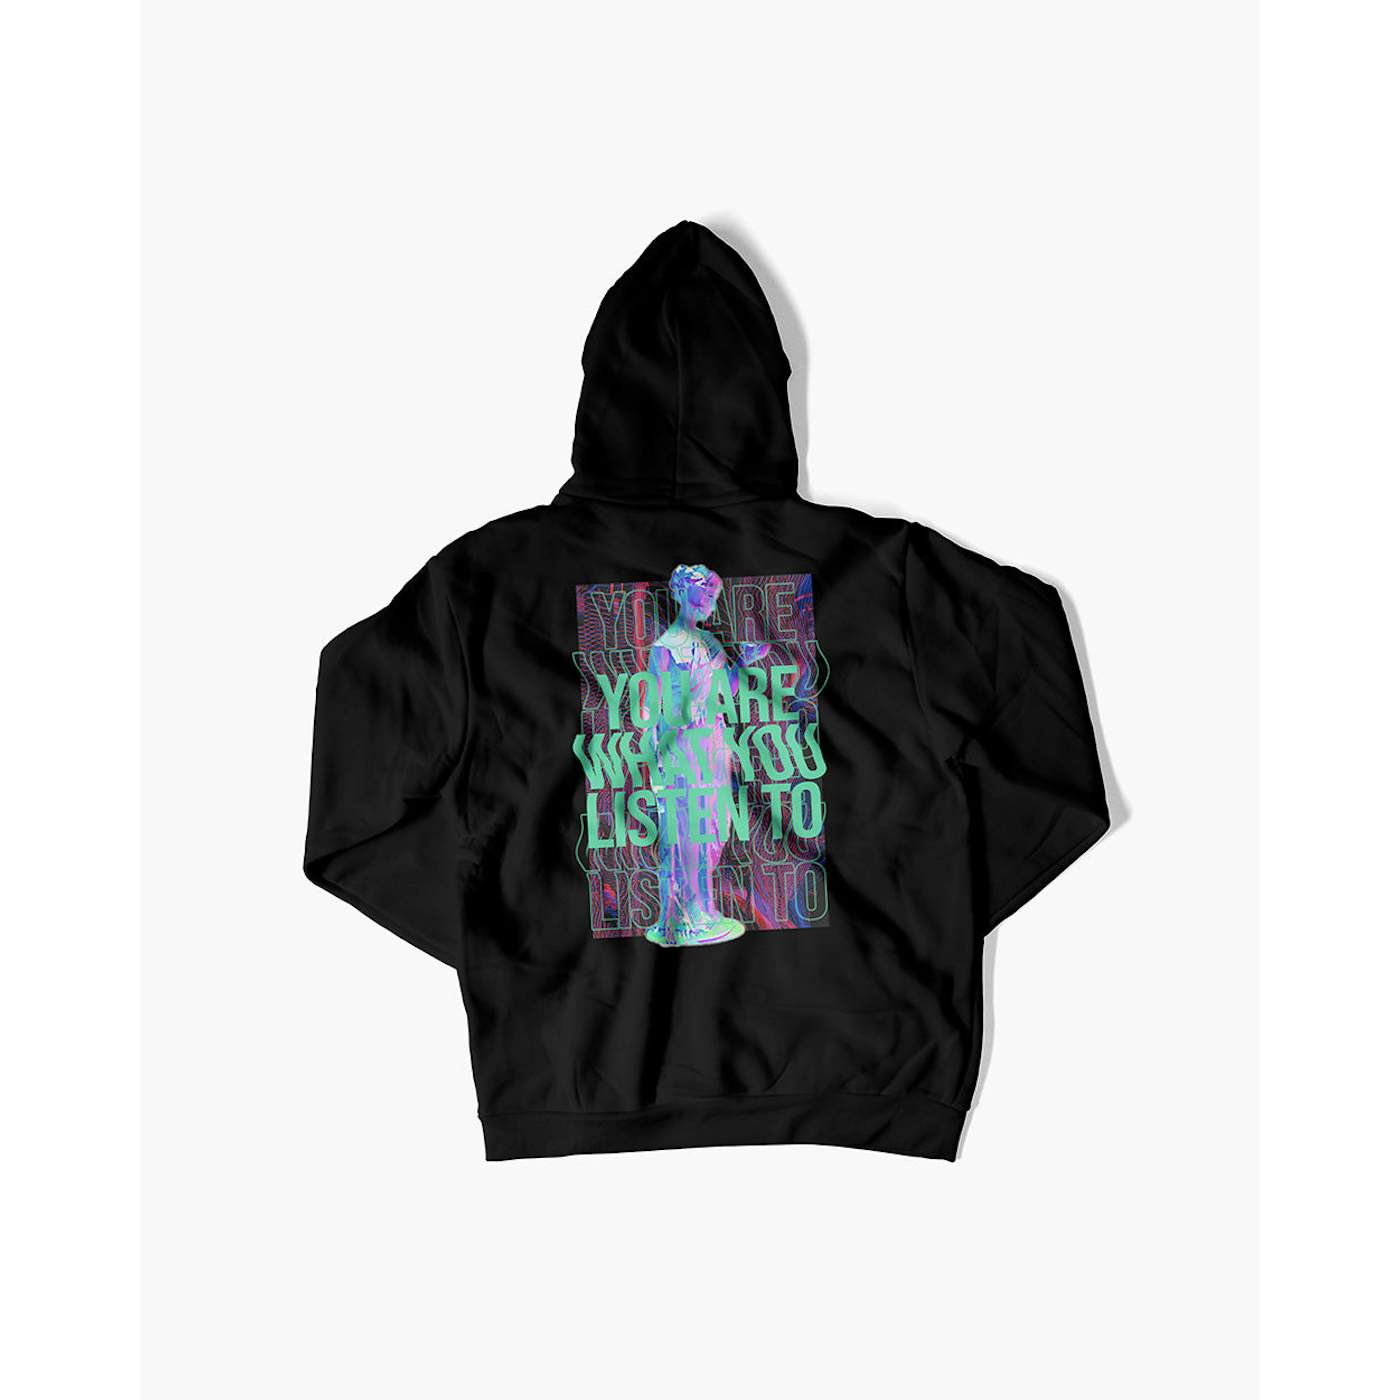 Rave Clothing You are what you listen to Hoodie in schwarz